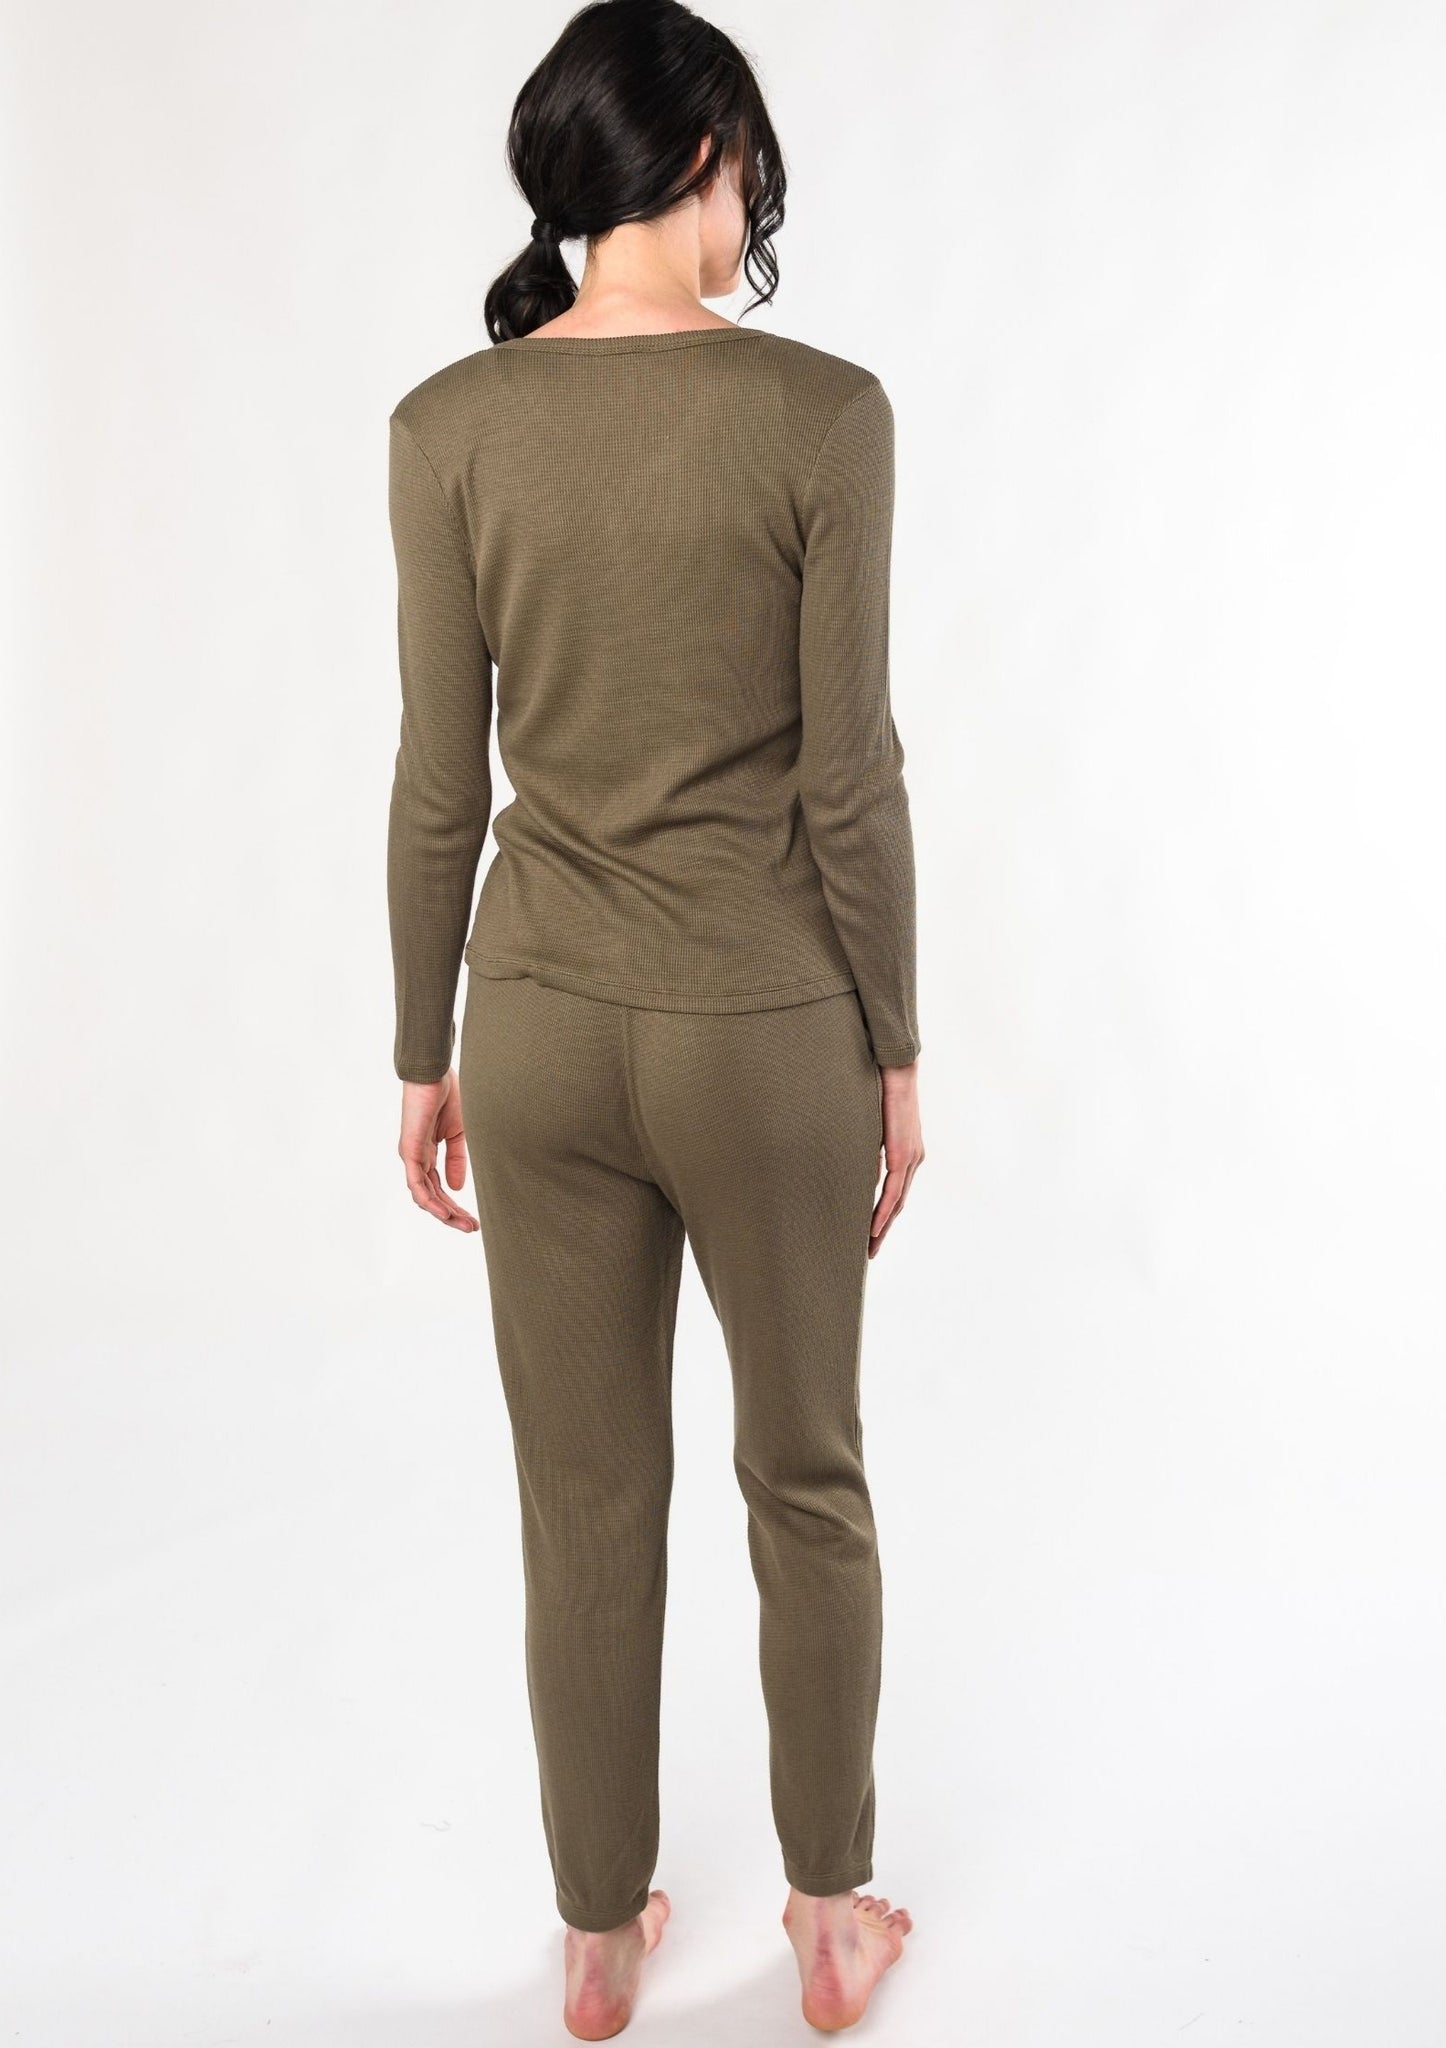 Olive + Oak 3-Piece Jogger/ Loungewear Set in XS. New With Tags.